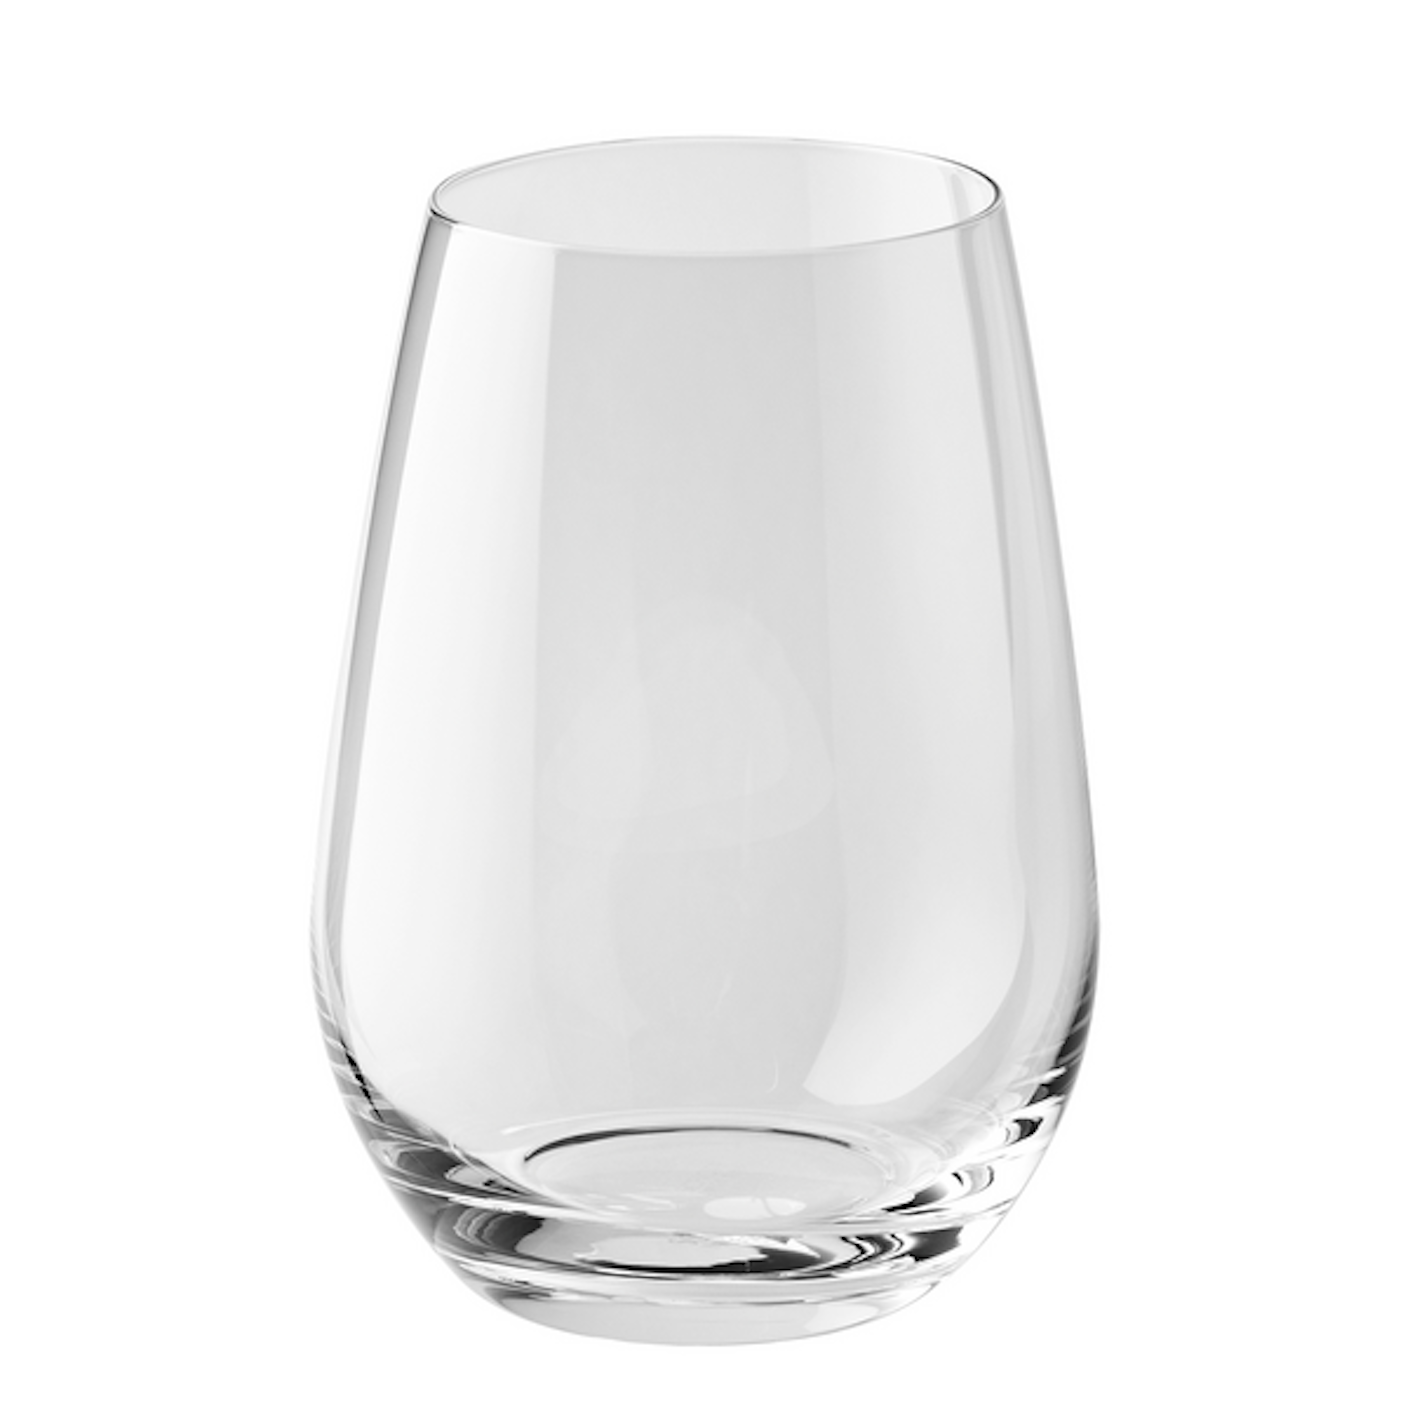 A clear glass wine glass is pictured.